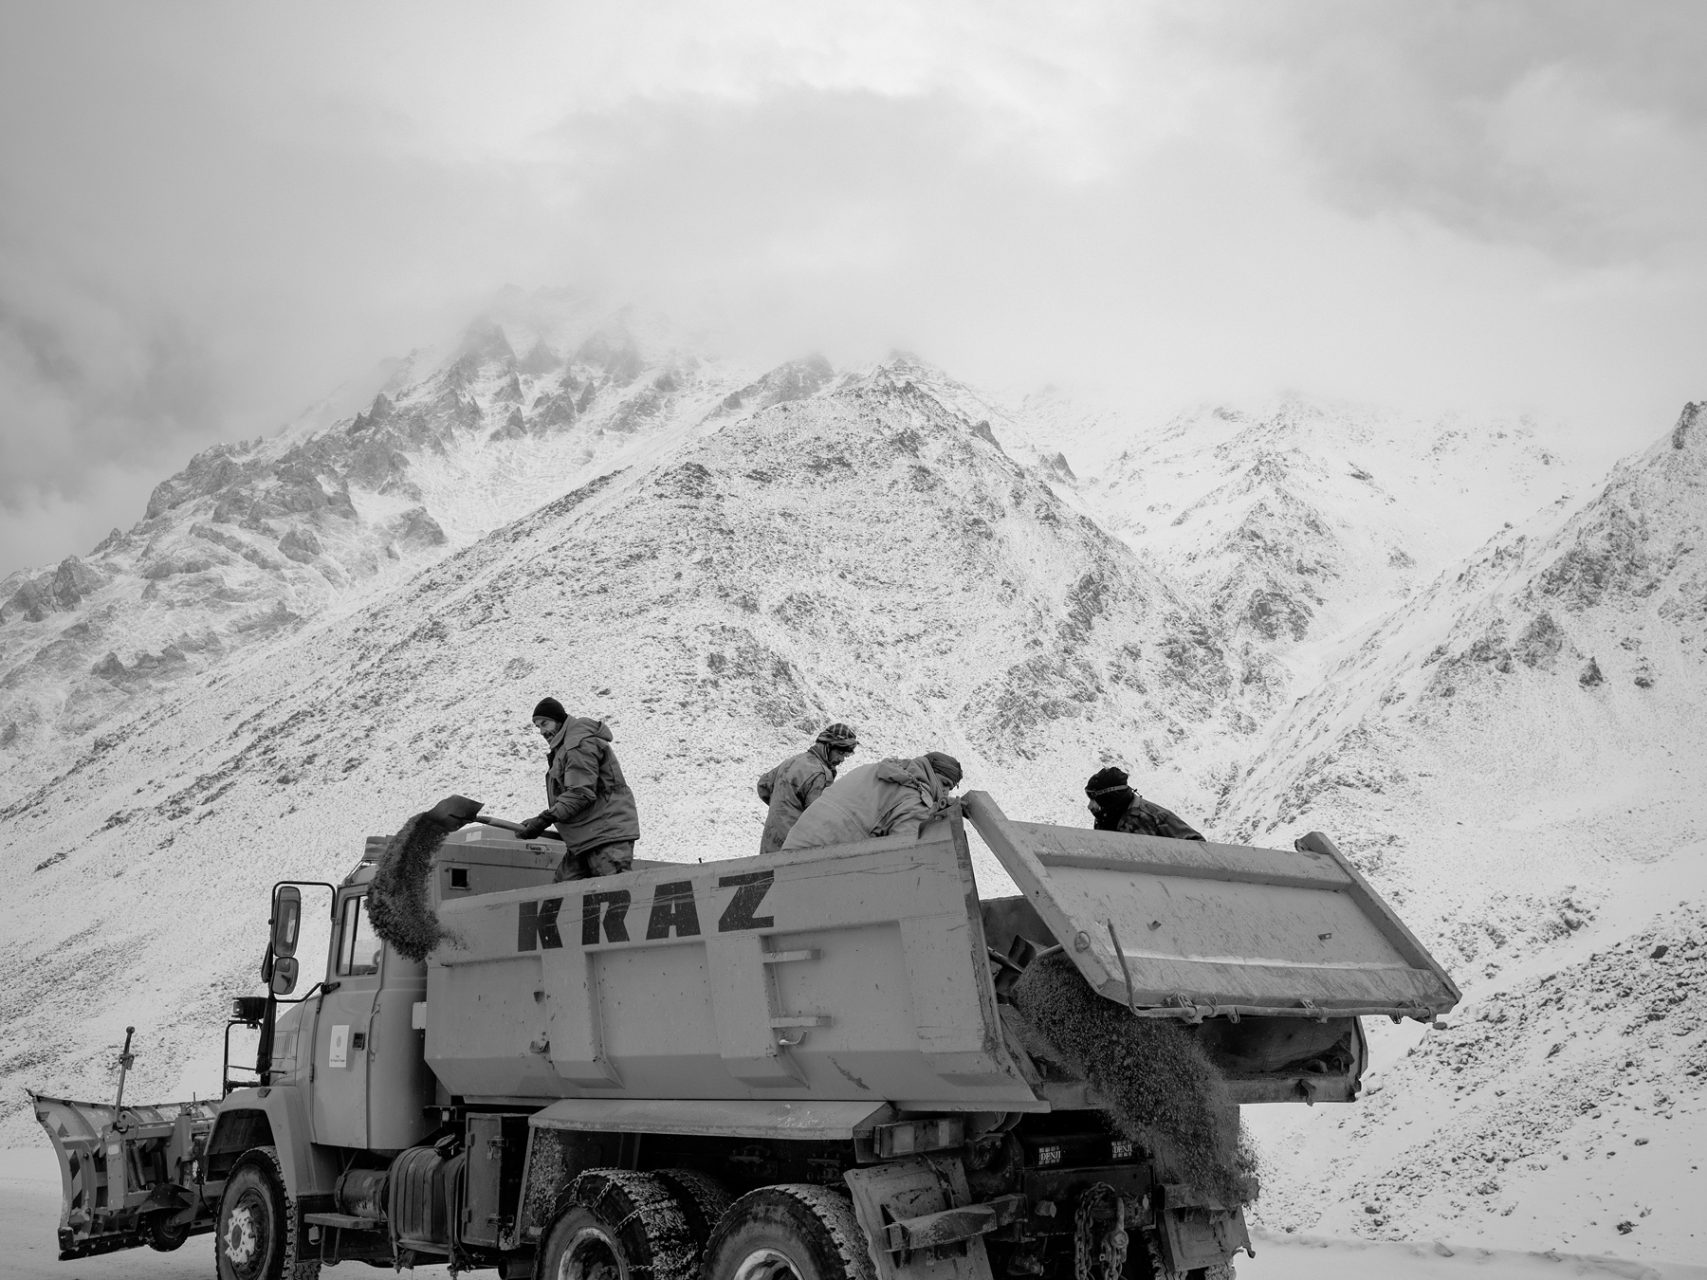 Workers of the Salang tunnel directorate sprinkle sand on the iced surface of the road.